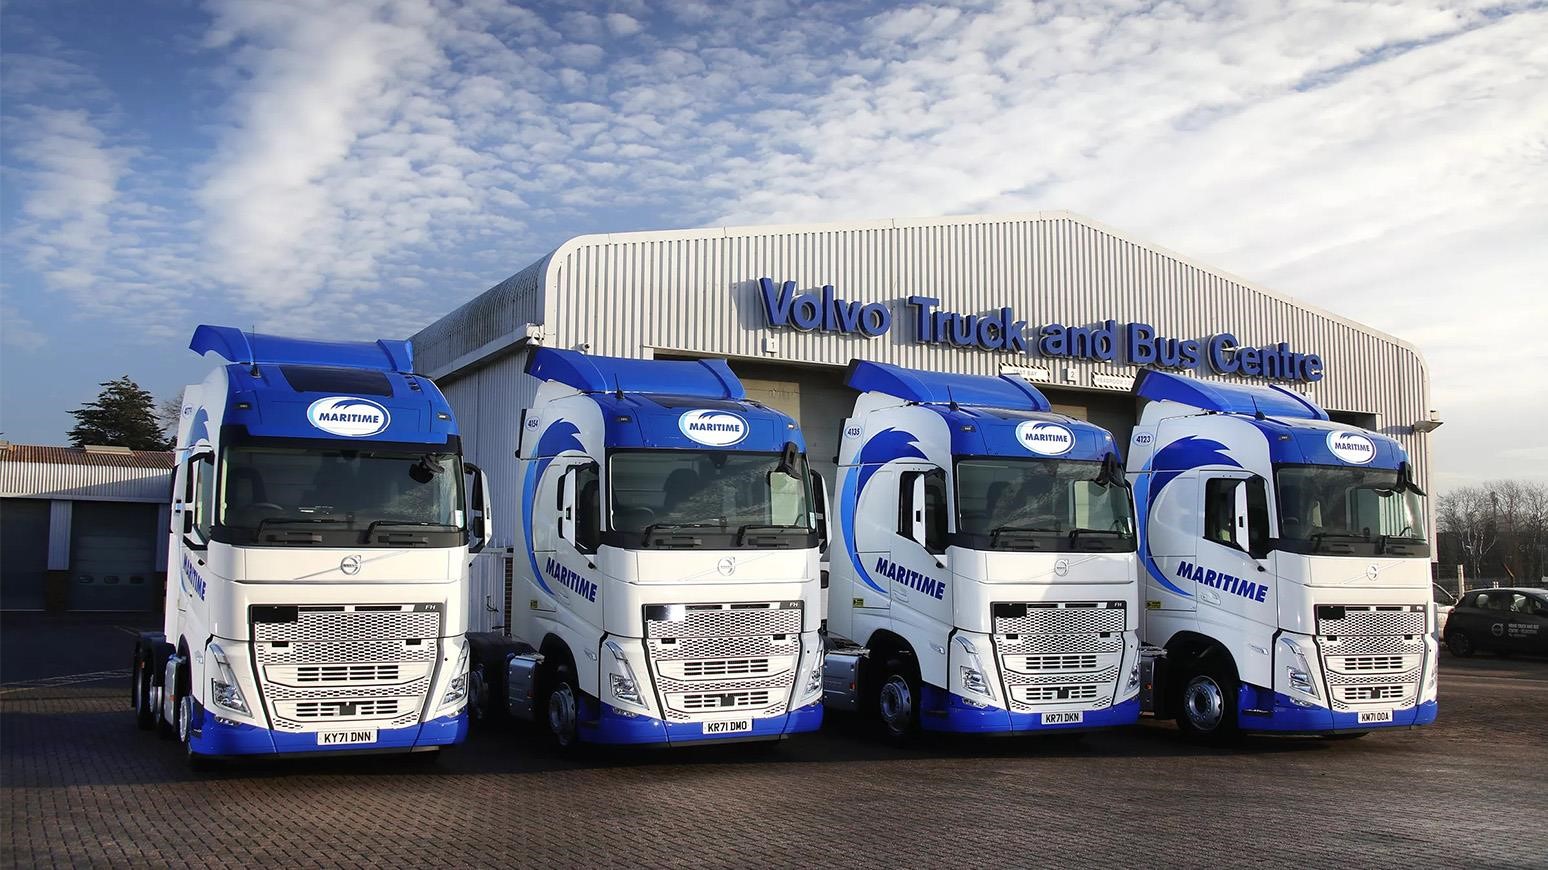 Maritime Transport Finds Volvo FH With I-Save Trucks Well-Specced & Fuel-Efficient, Buys 355 More